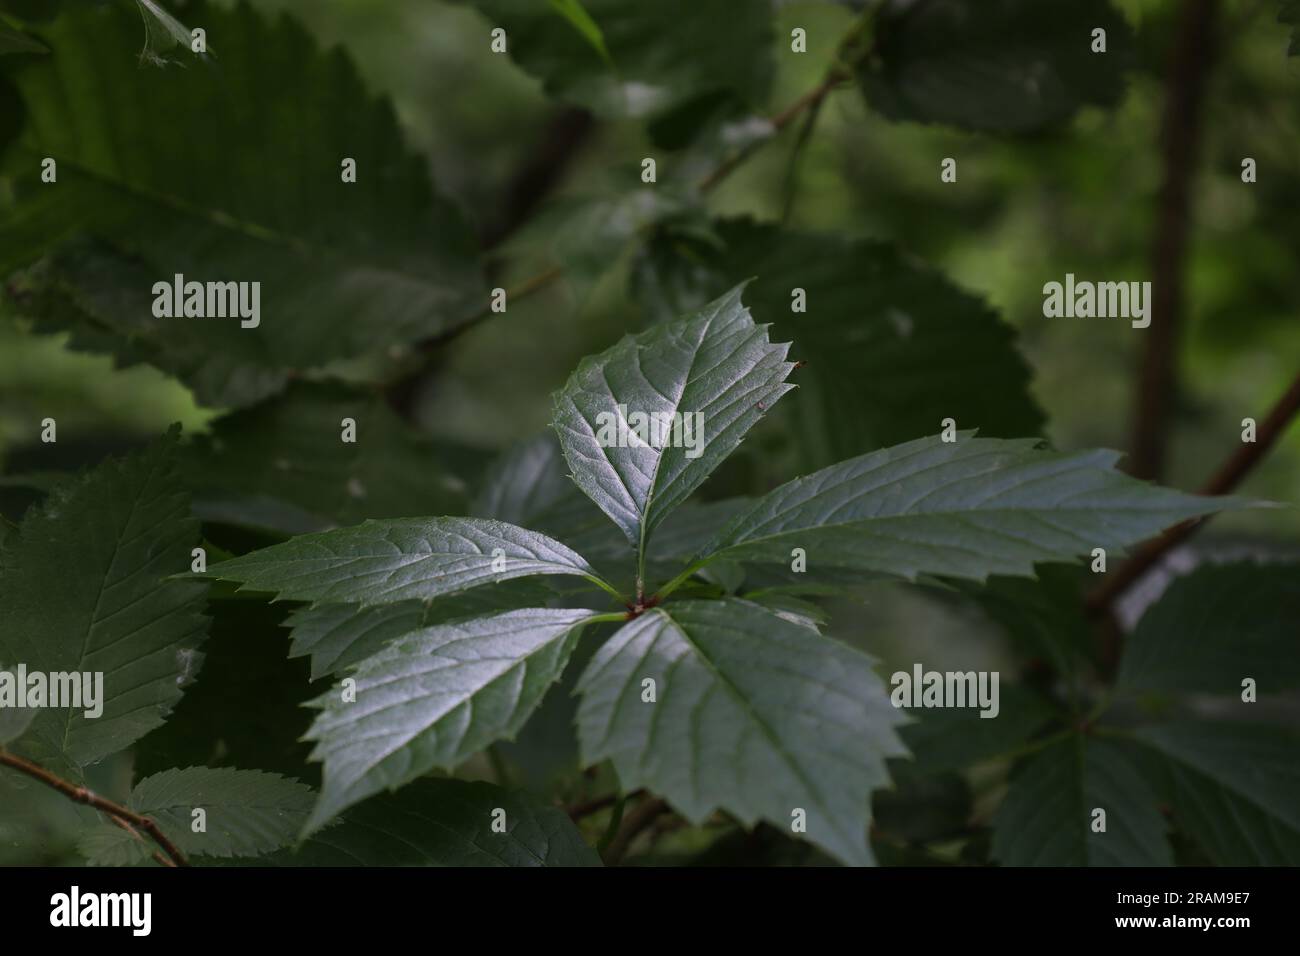 Parthenocissus inserta in the rainy forest Stock Photo